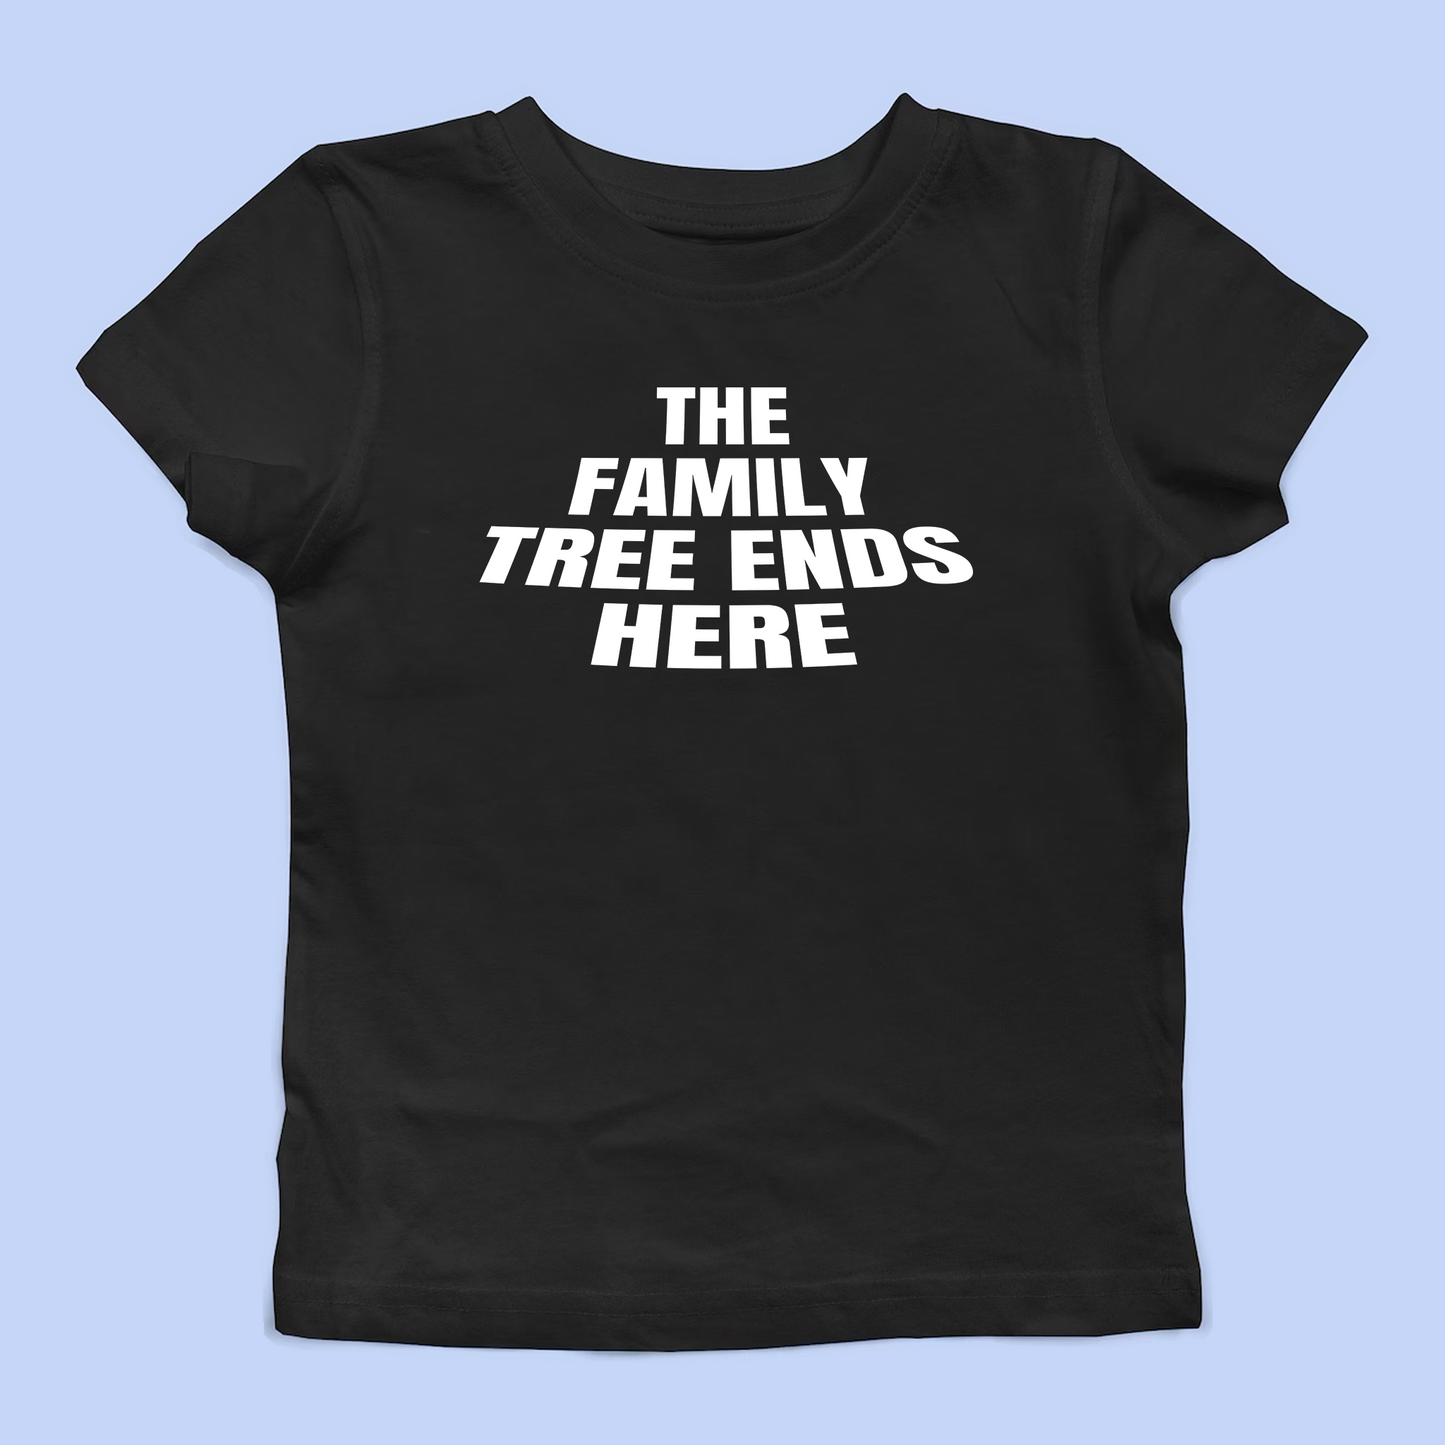 The Family Tree Ends Here Baby Tee